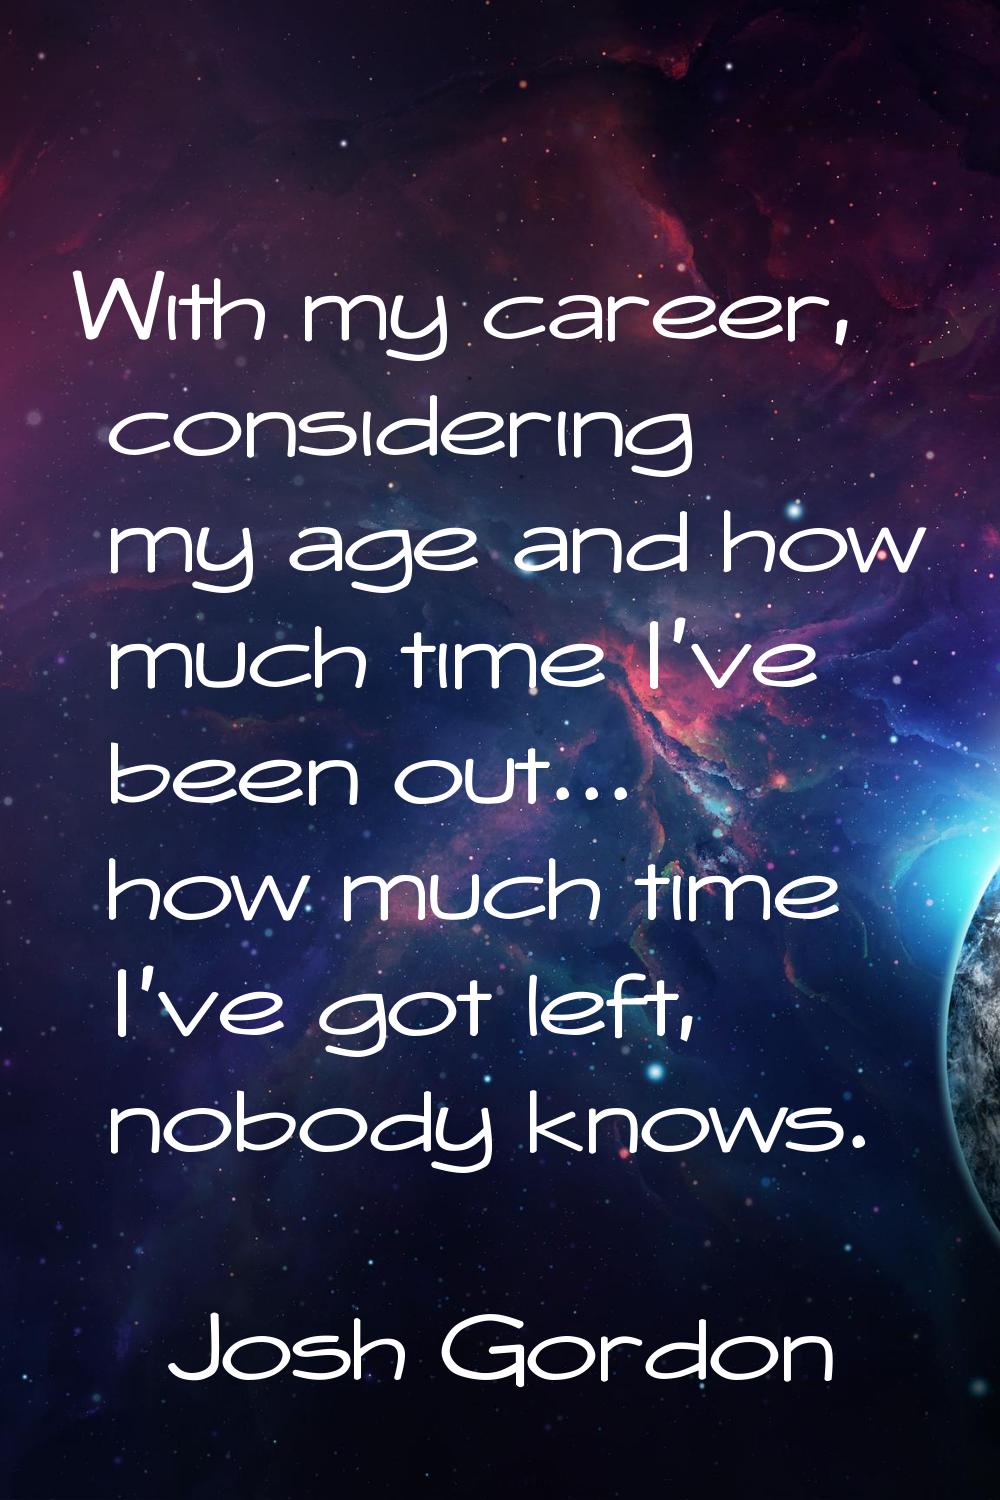 With my career, considering my age and how much time I've been out... how much time I've got left, 